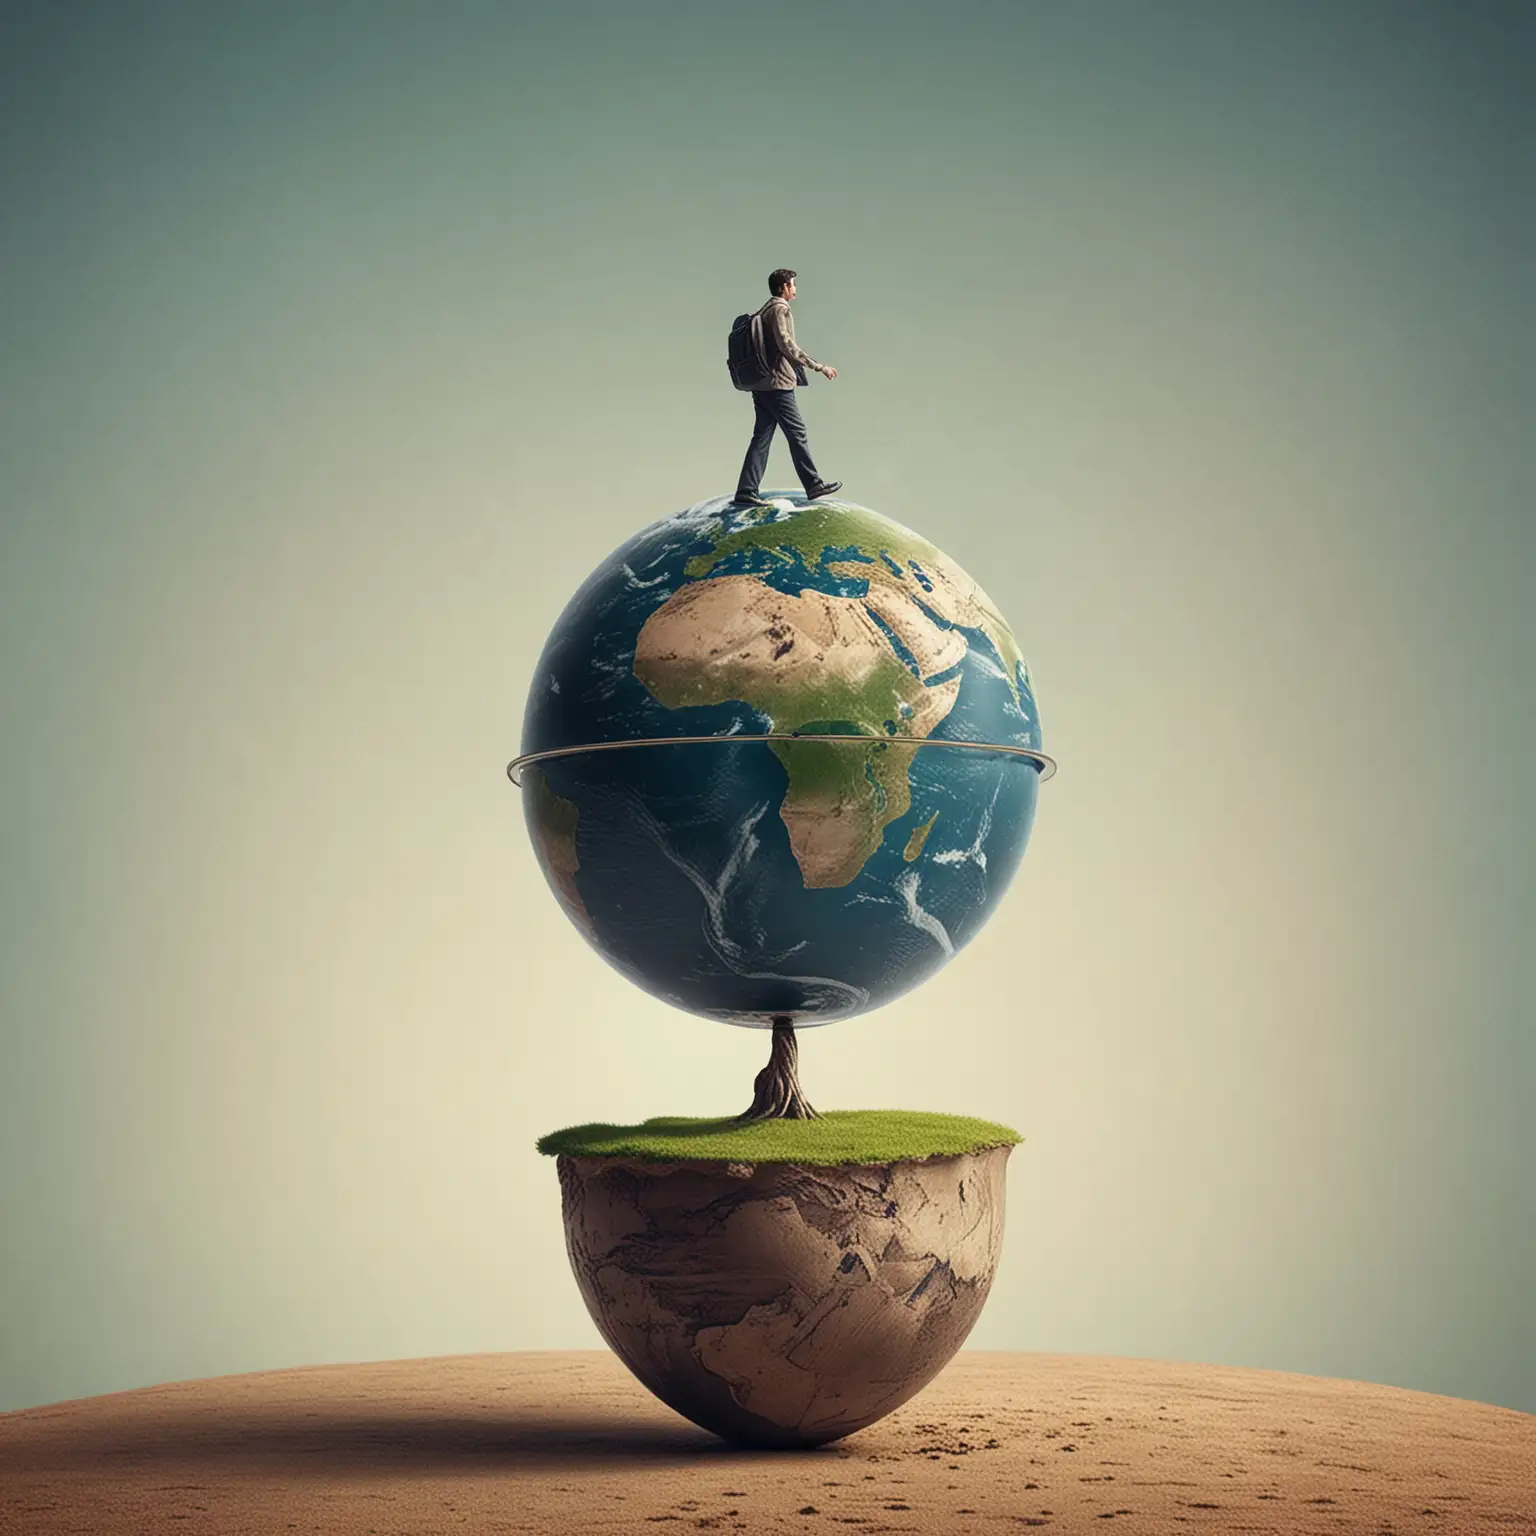 earth globe with one man walking on top of it